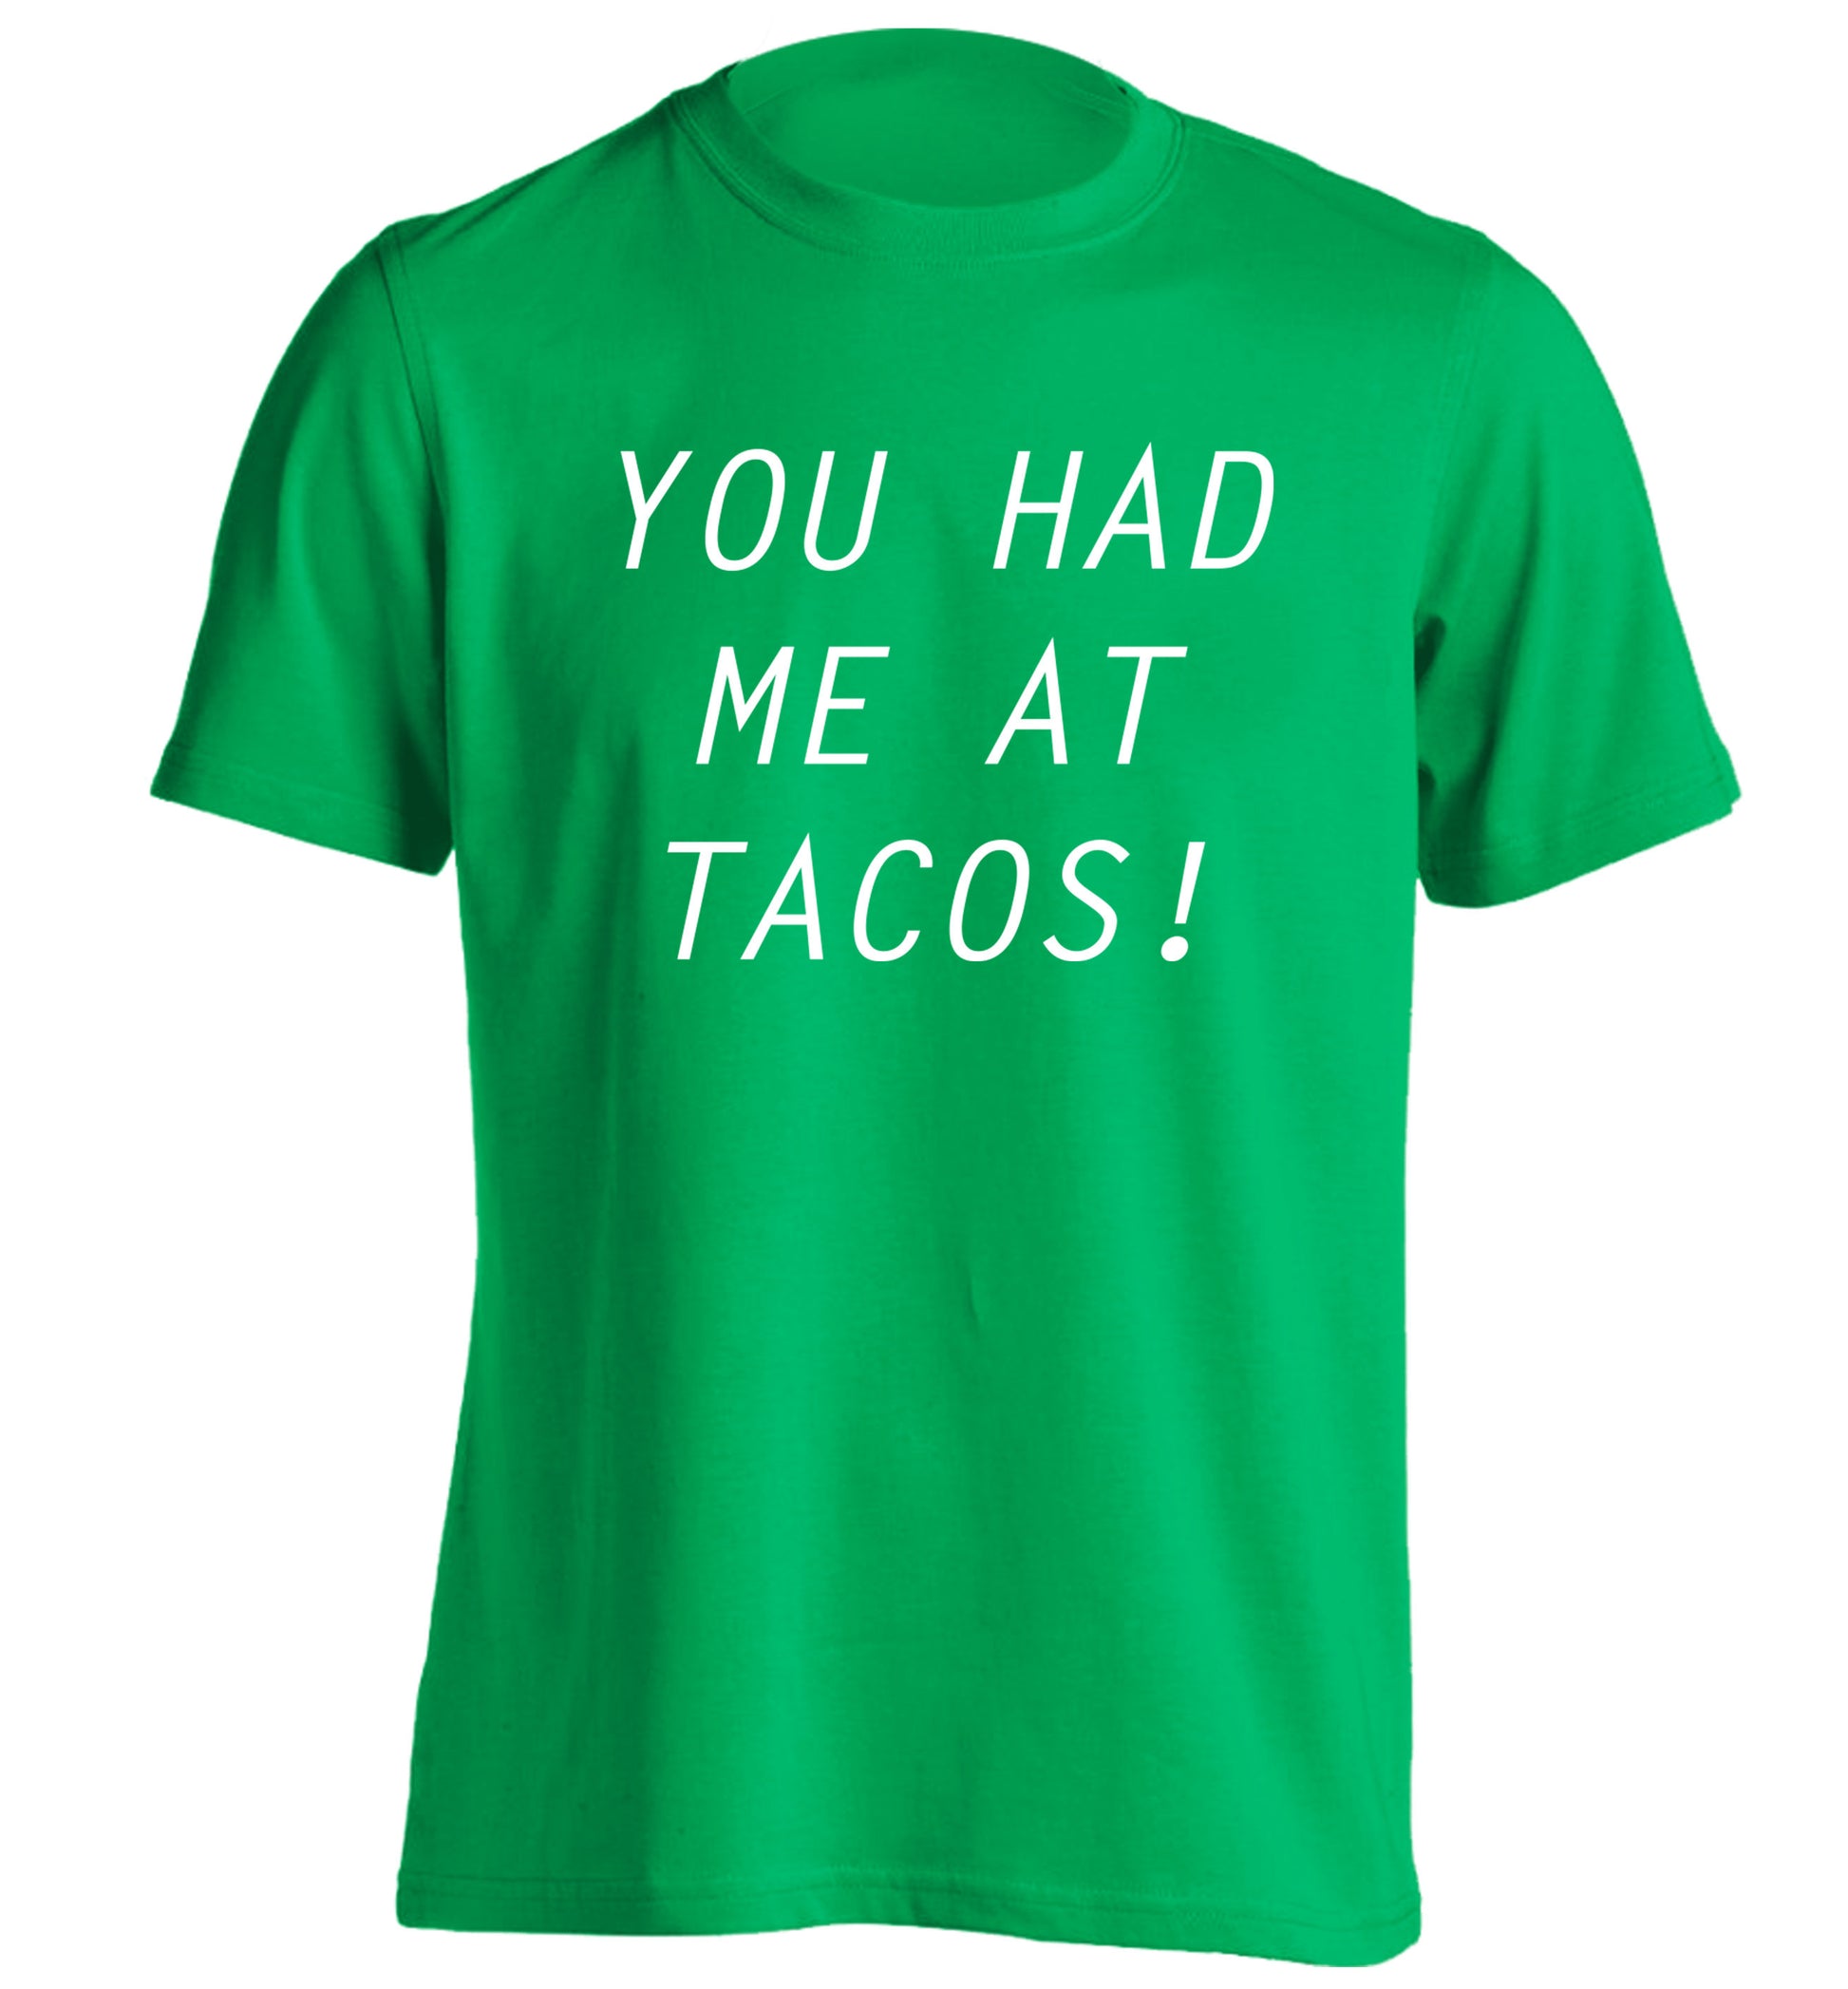 You had me at tacos adults unisex green Tshirt 2XL